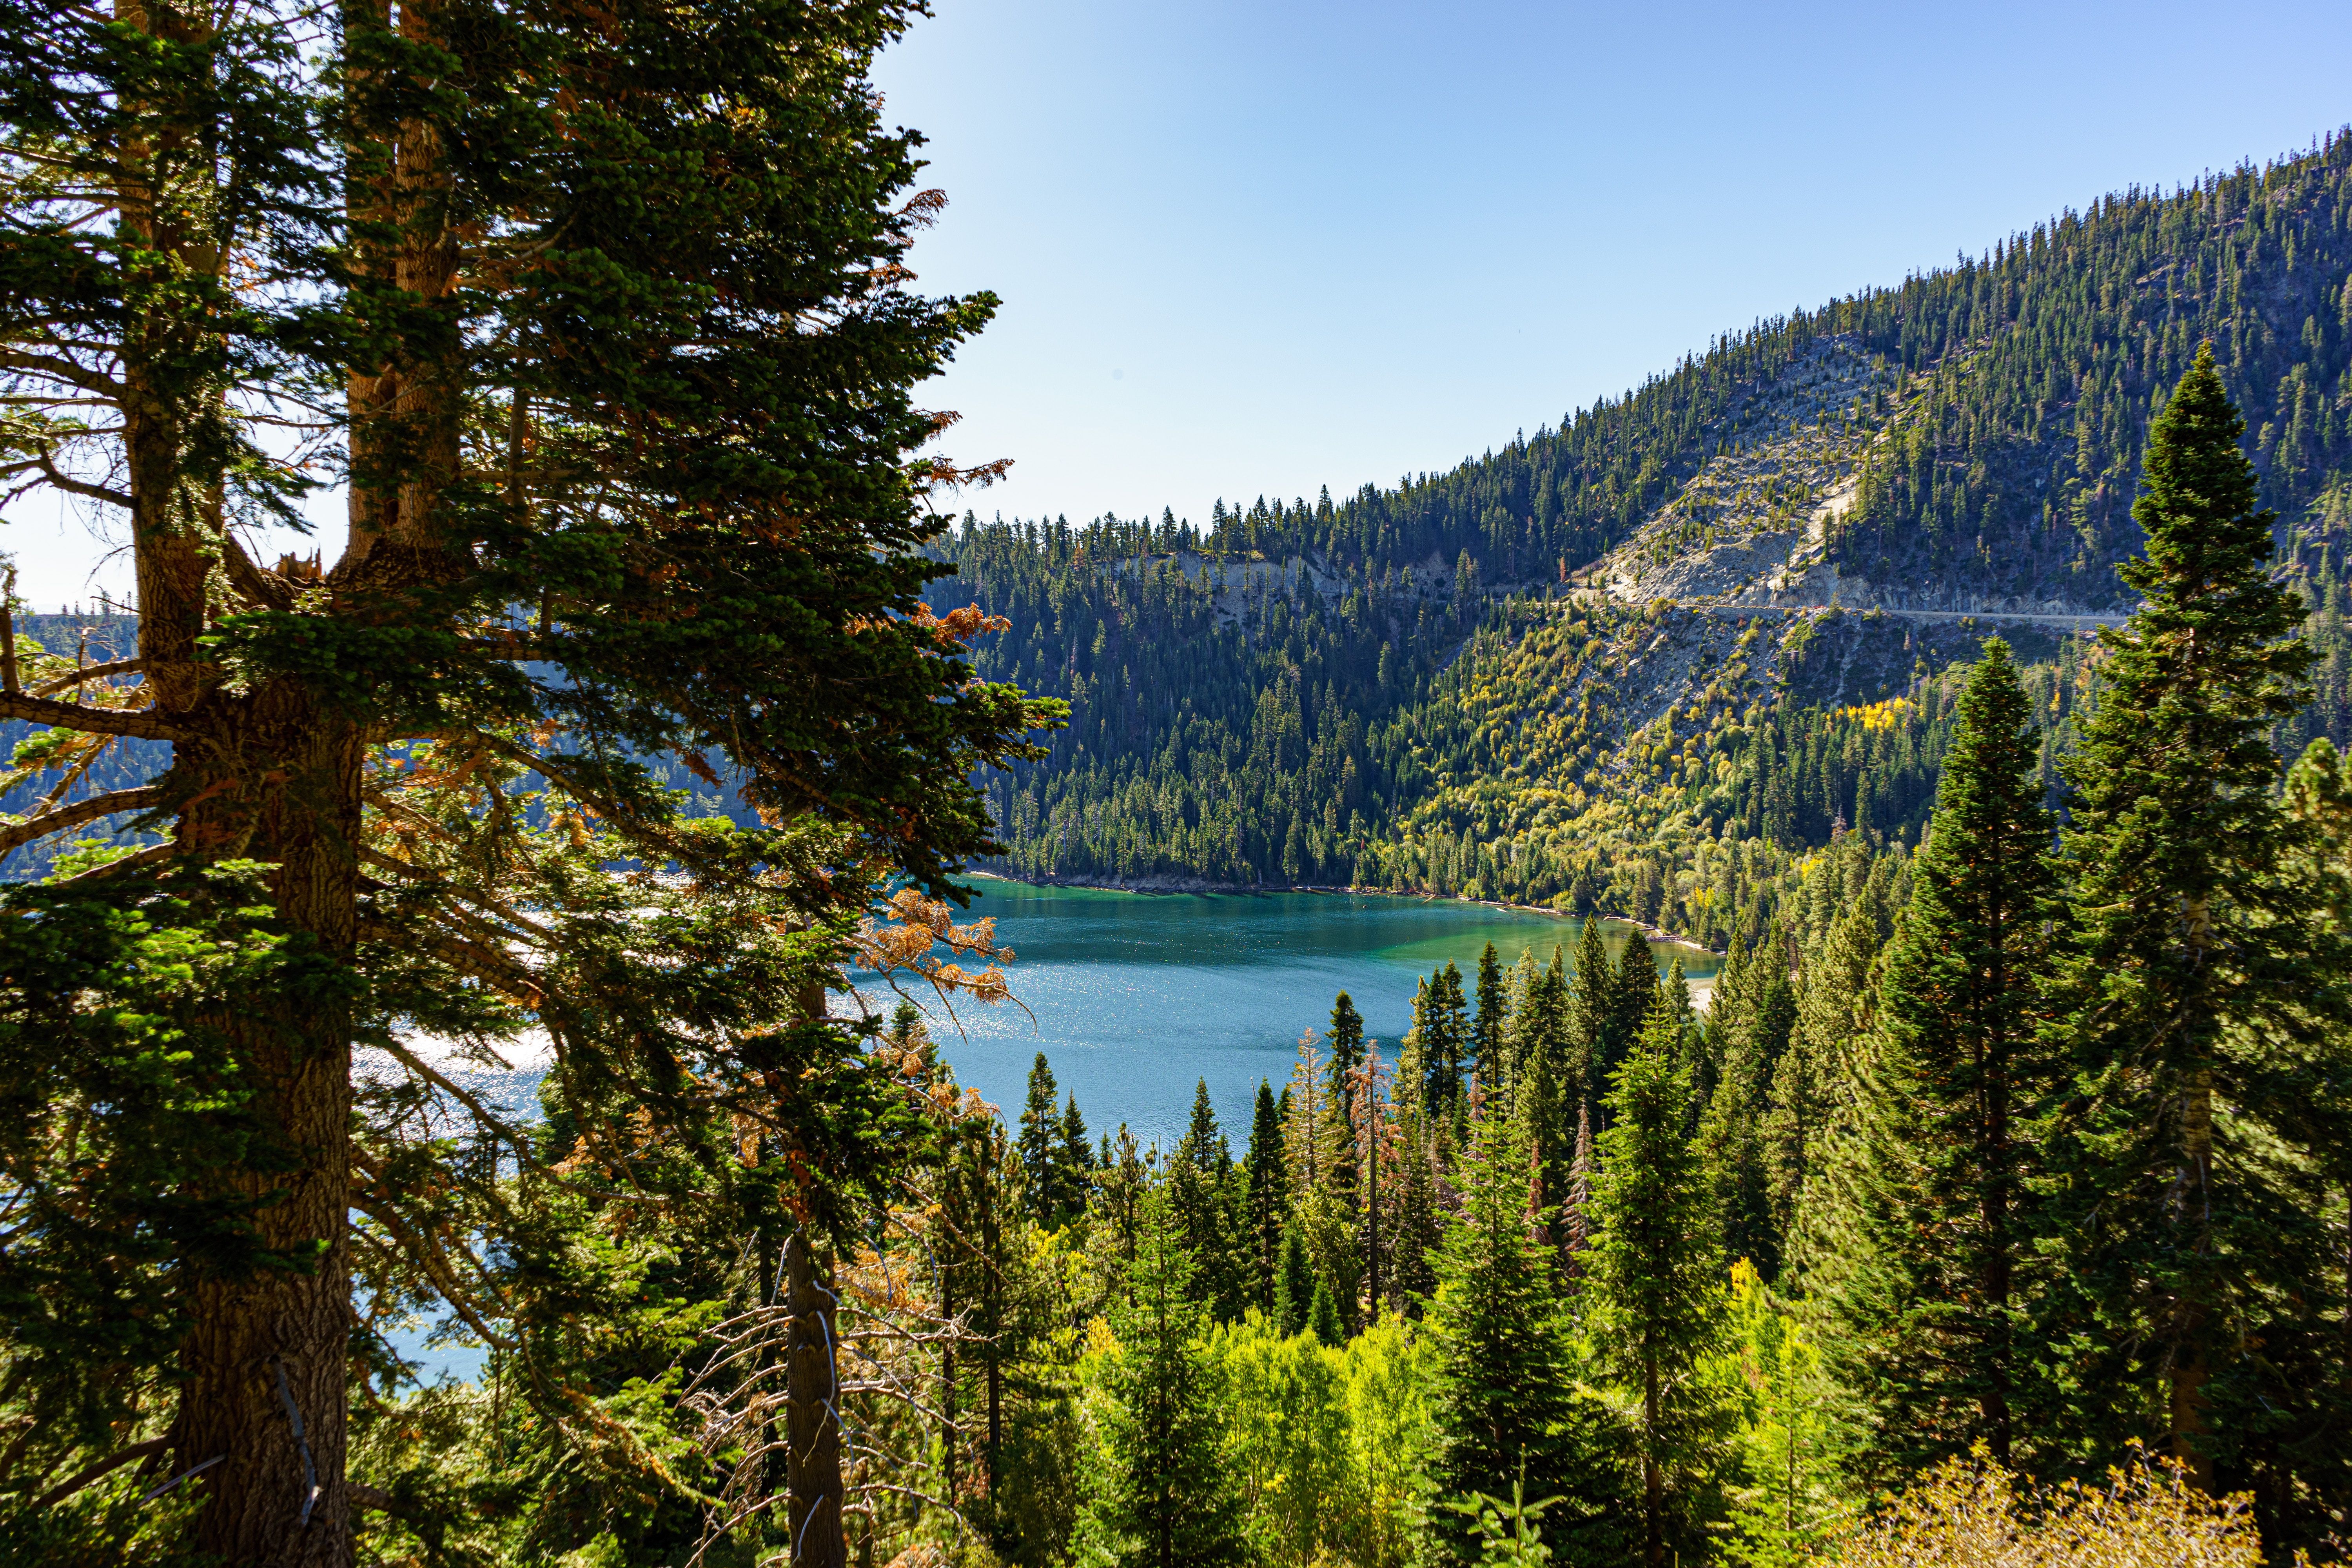 A lake surrounded by forest-carpeted hills under a bright blue sky in Lake Tahoe